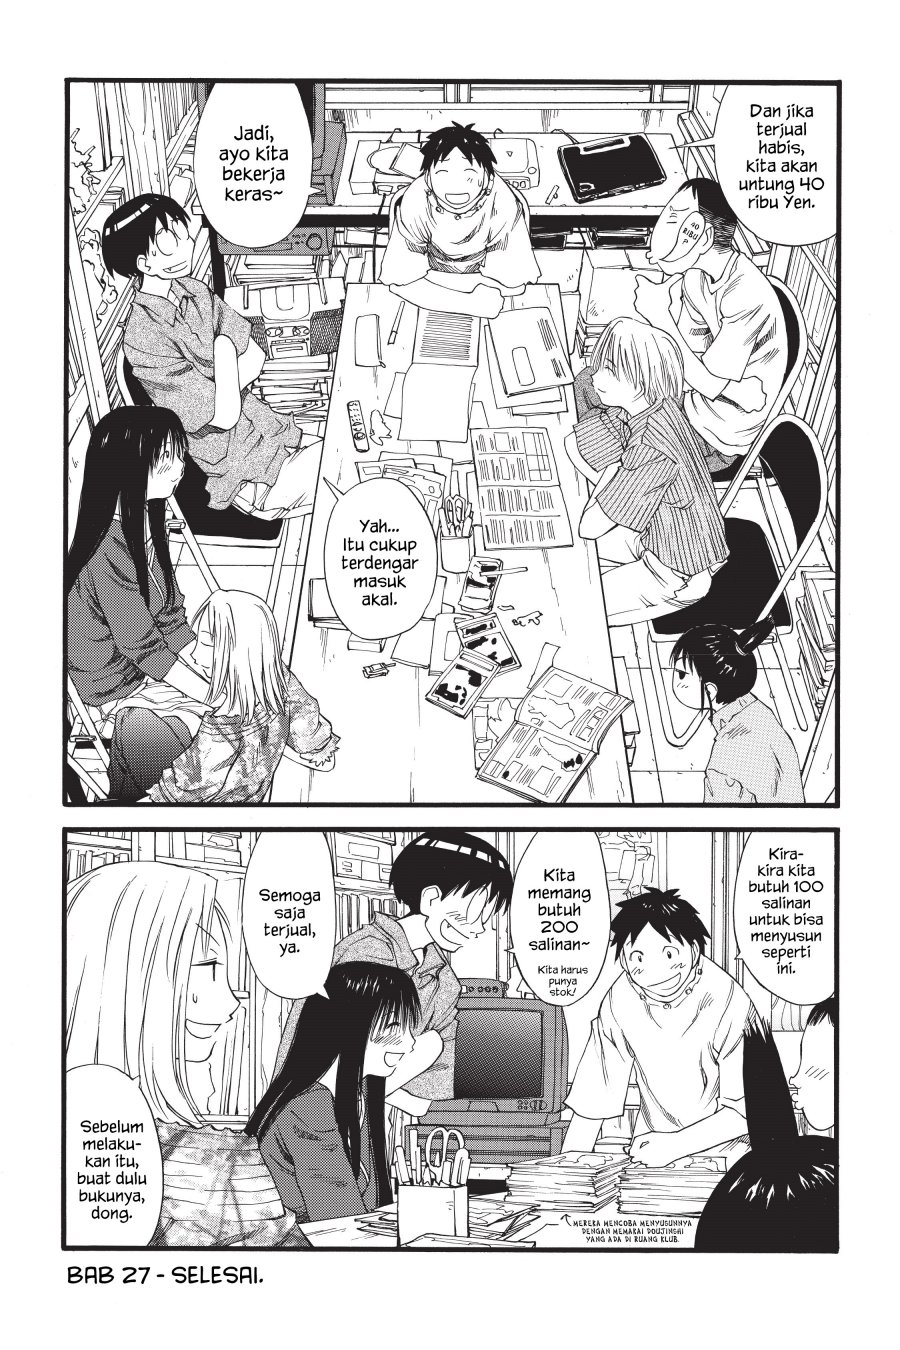 Genshiken – The Society for the Study of Modern Visual Culture Chapter 27 Image 23